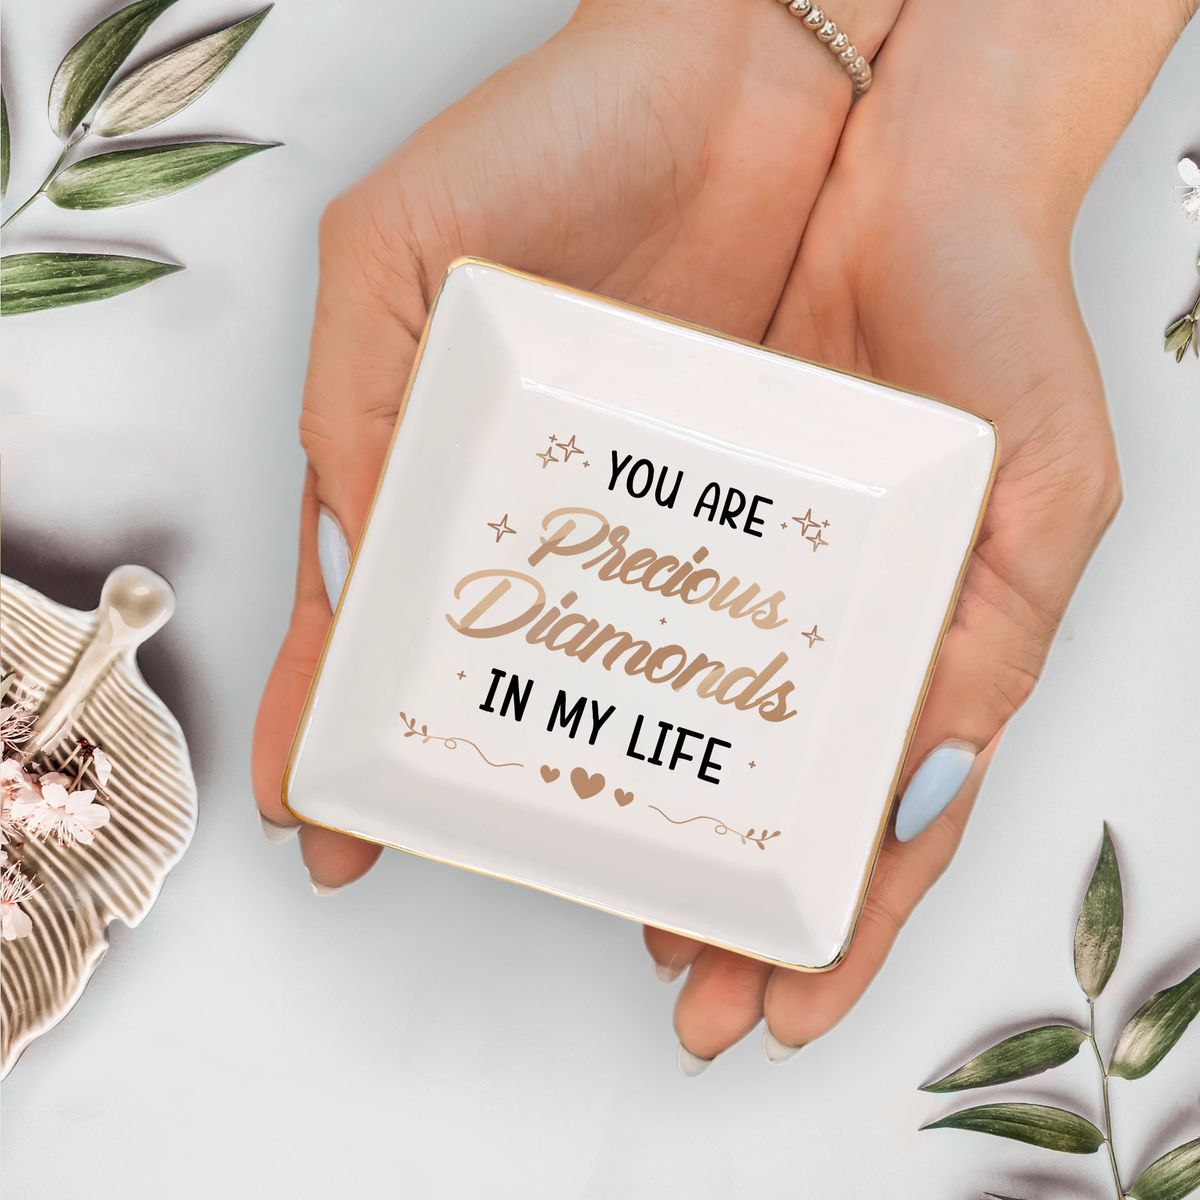 Jewelry Tray - You Are A Precious Diamonds In My Life - Bridesmaid Gifts, Birthday Gift for Her, Graduation Gift, Bridal Shower Gift, Gift for Friends - Personalized Jewelry Tray_3